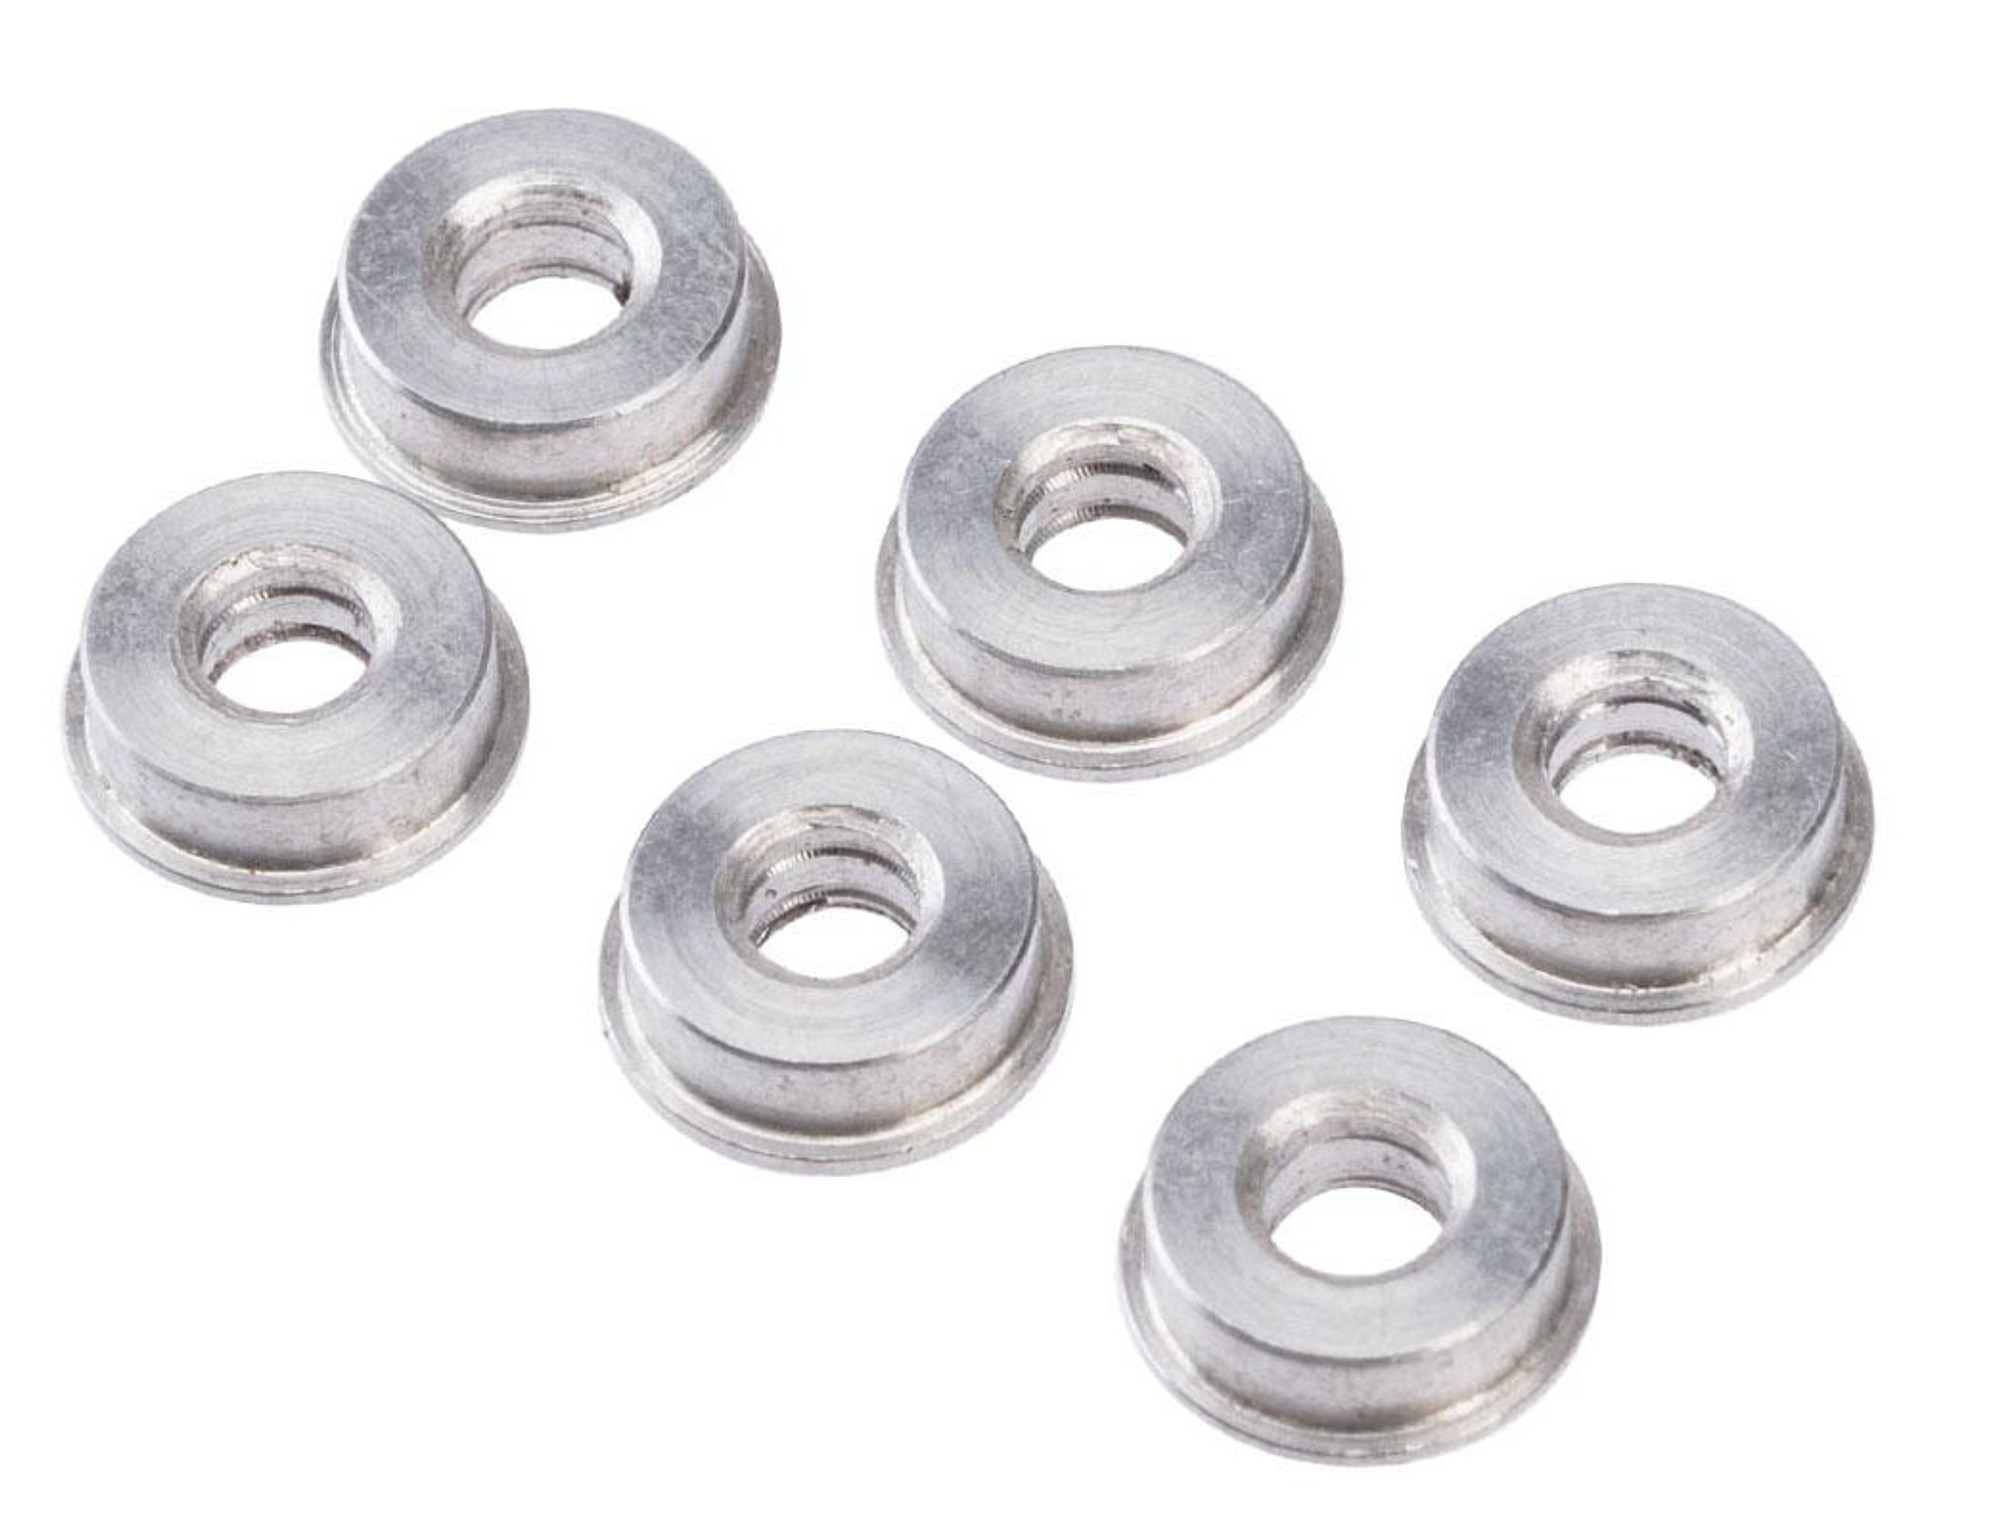 5KU Double Oil Tank Design Steel Bushings for Airsoft AEGs